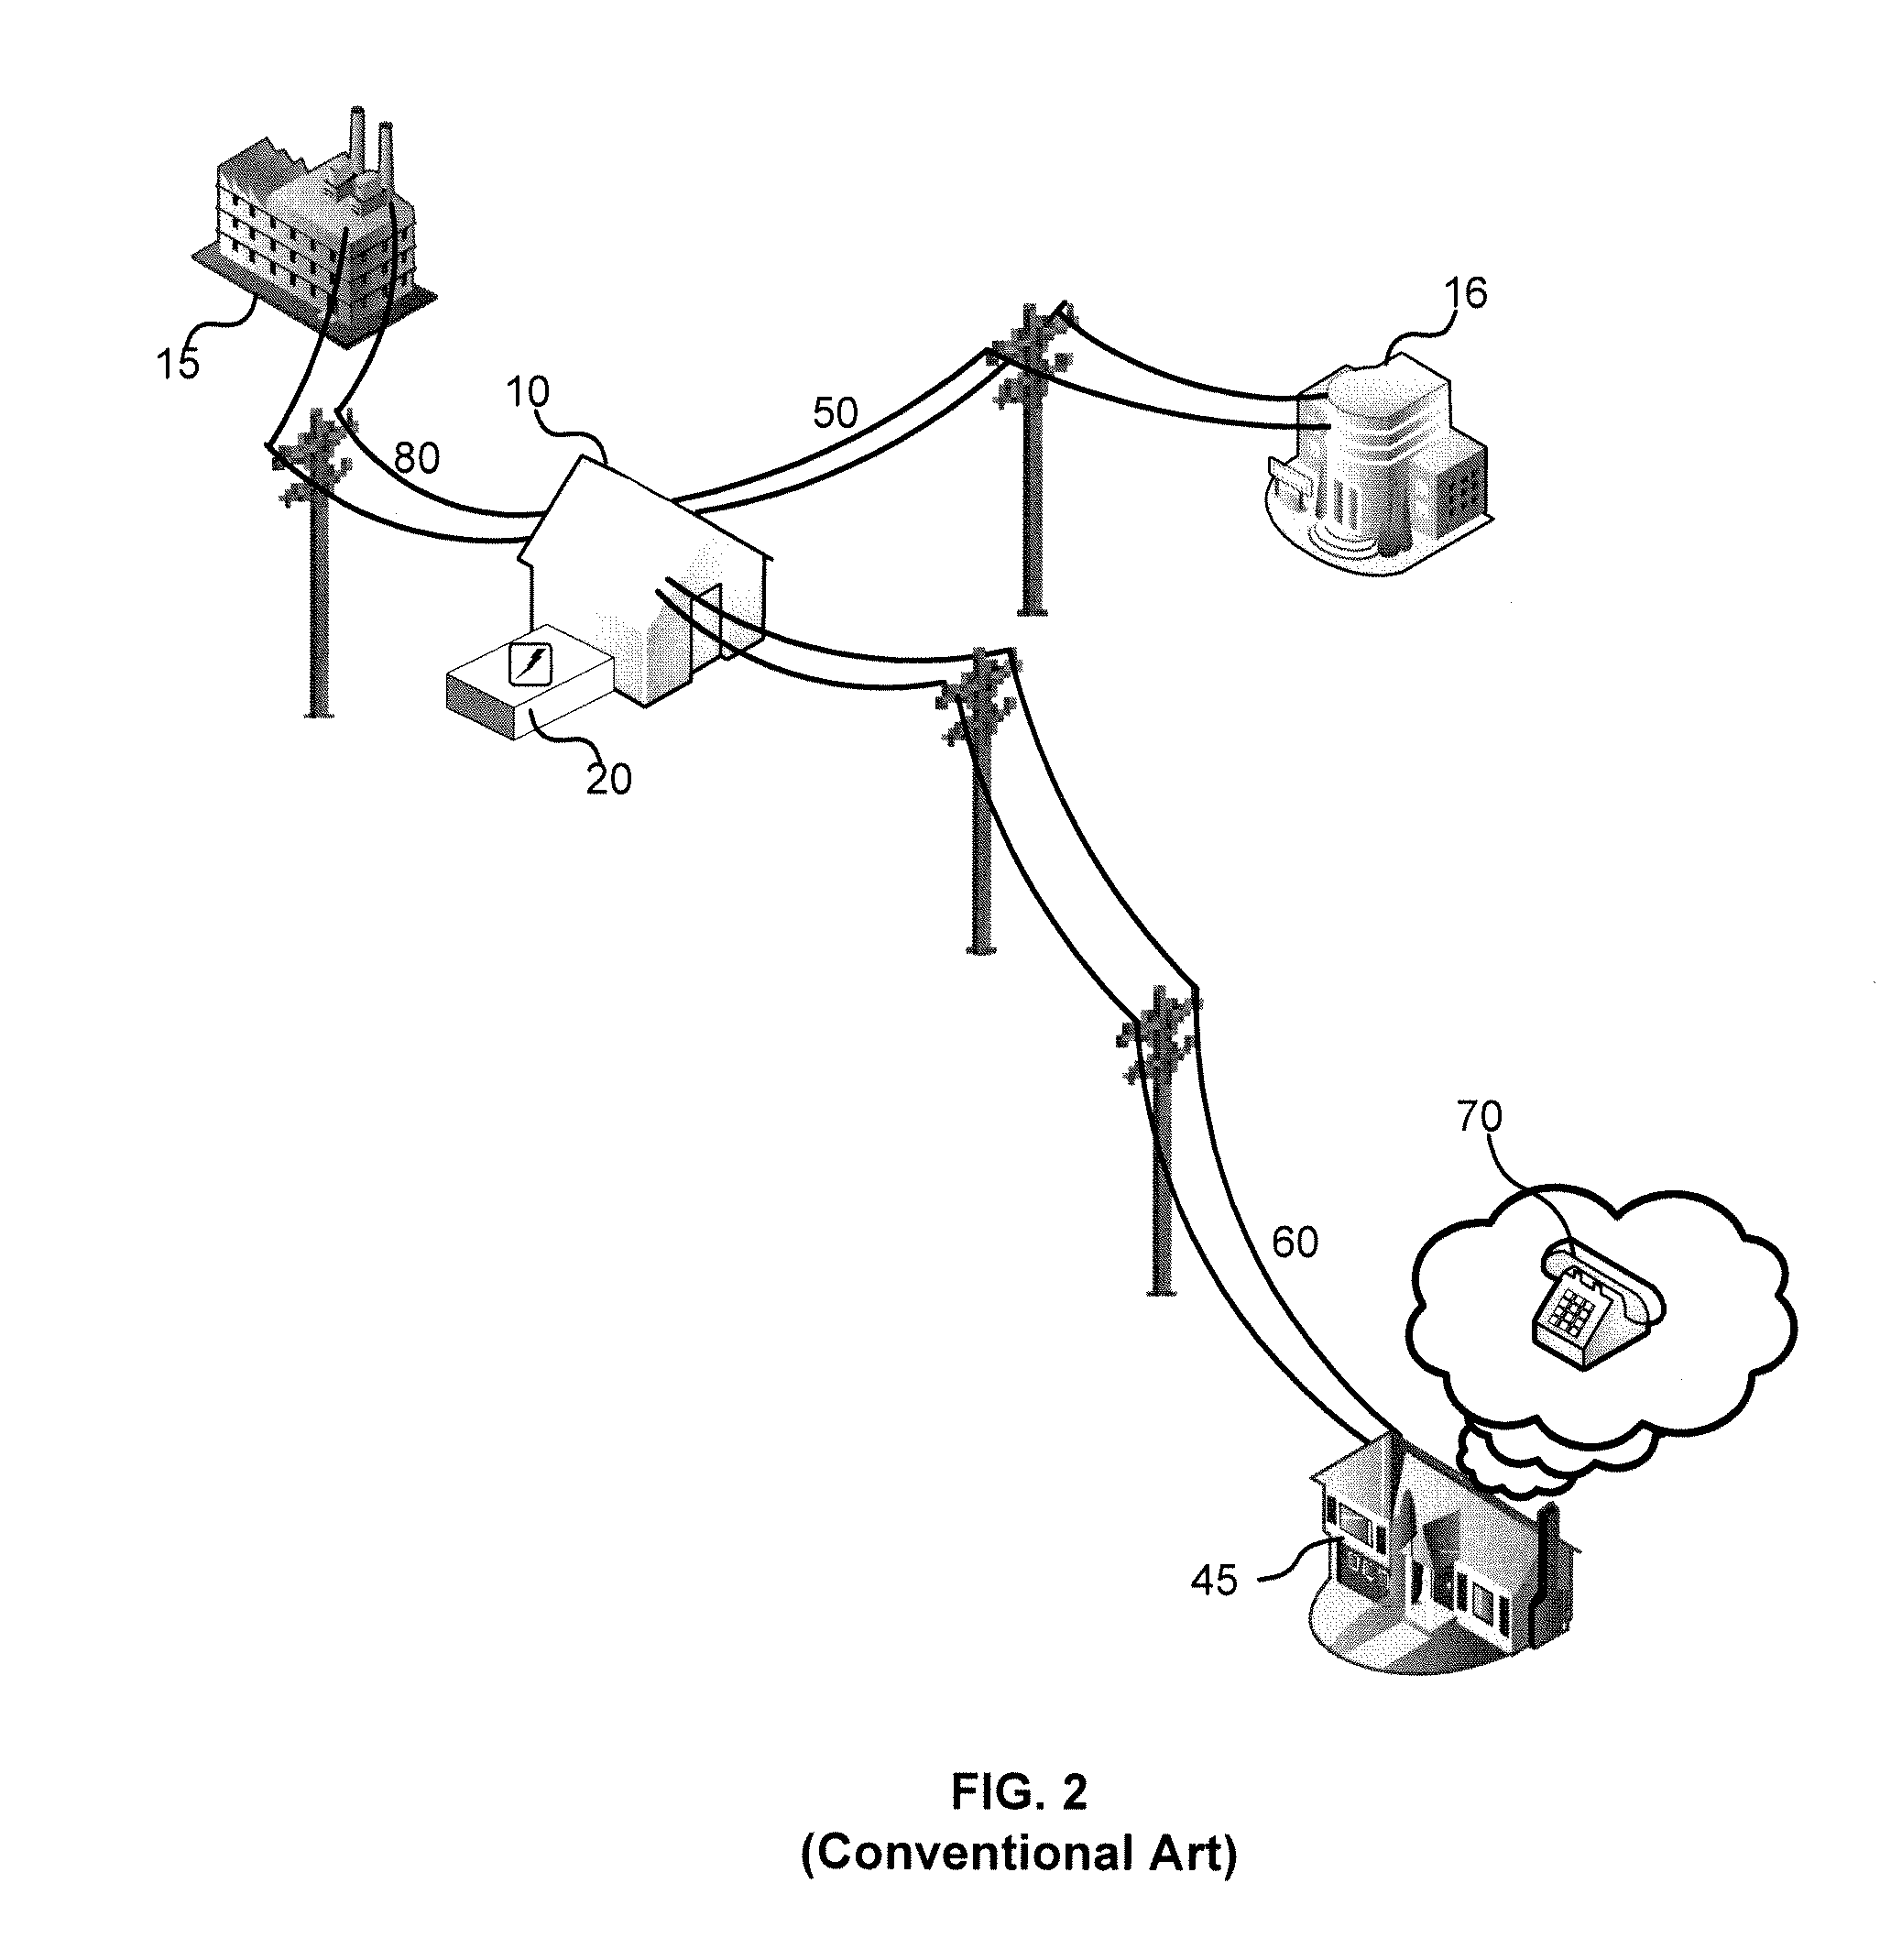 System and method for self-powered communications networks